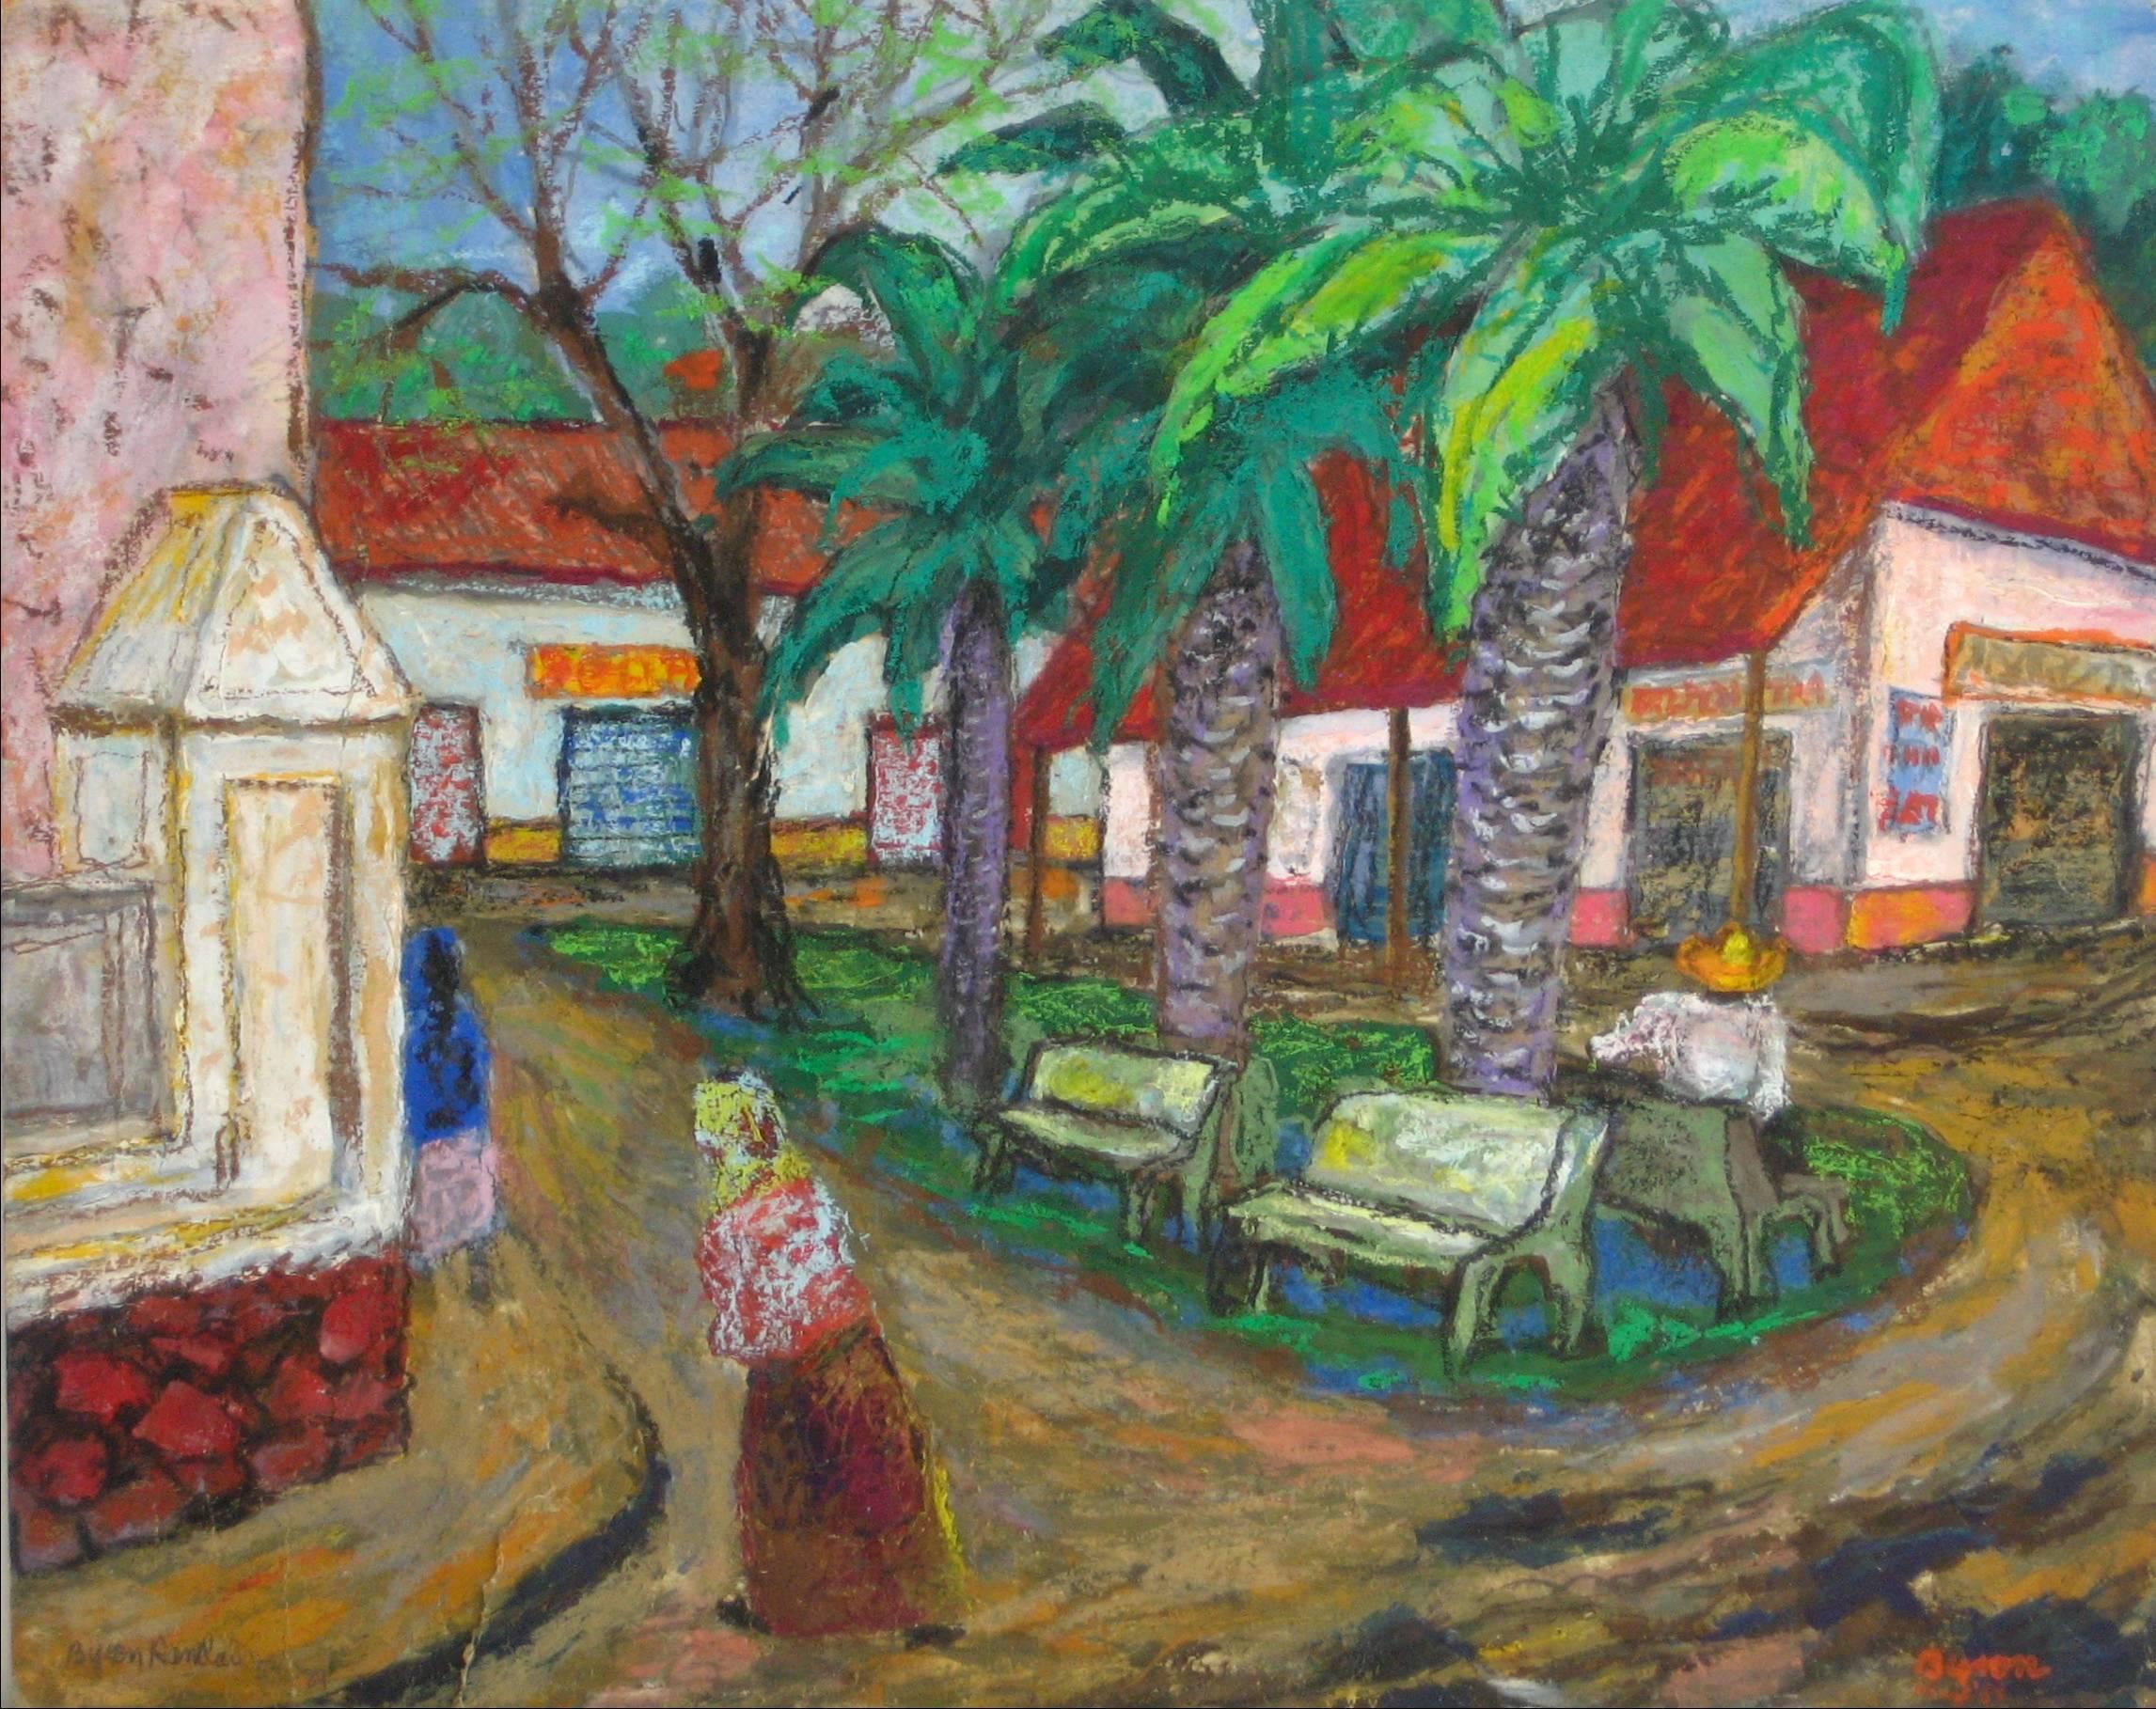 Byron Randall Figurative Art - "Plaza Apatzingán" Mexican Town Square in Oil Pastel, 1954